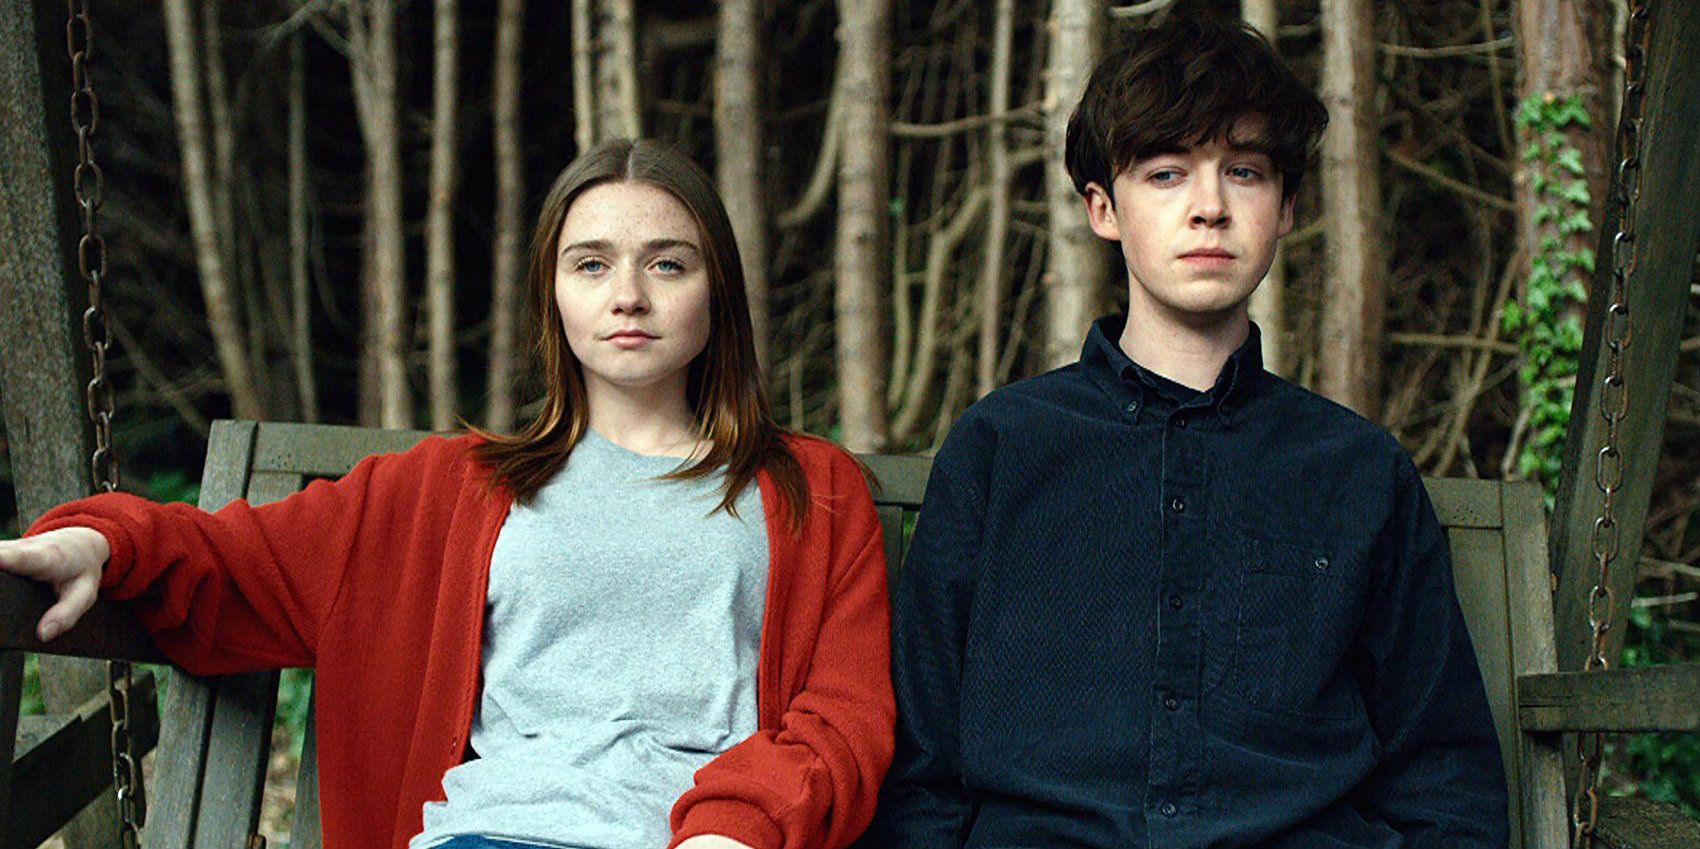 James and Alyssa sit on a bench in The End of the F***ing world.